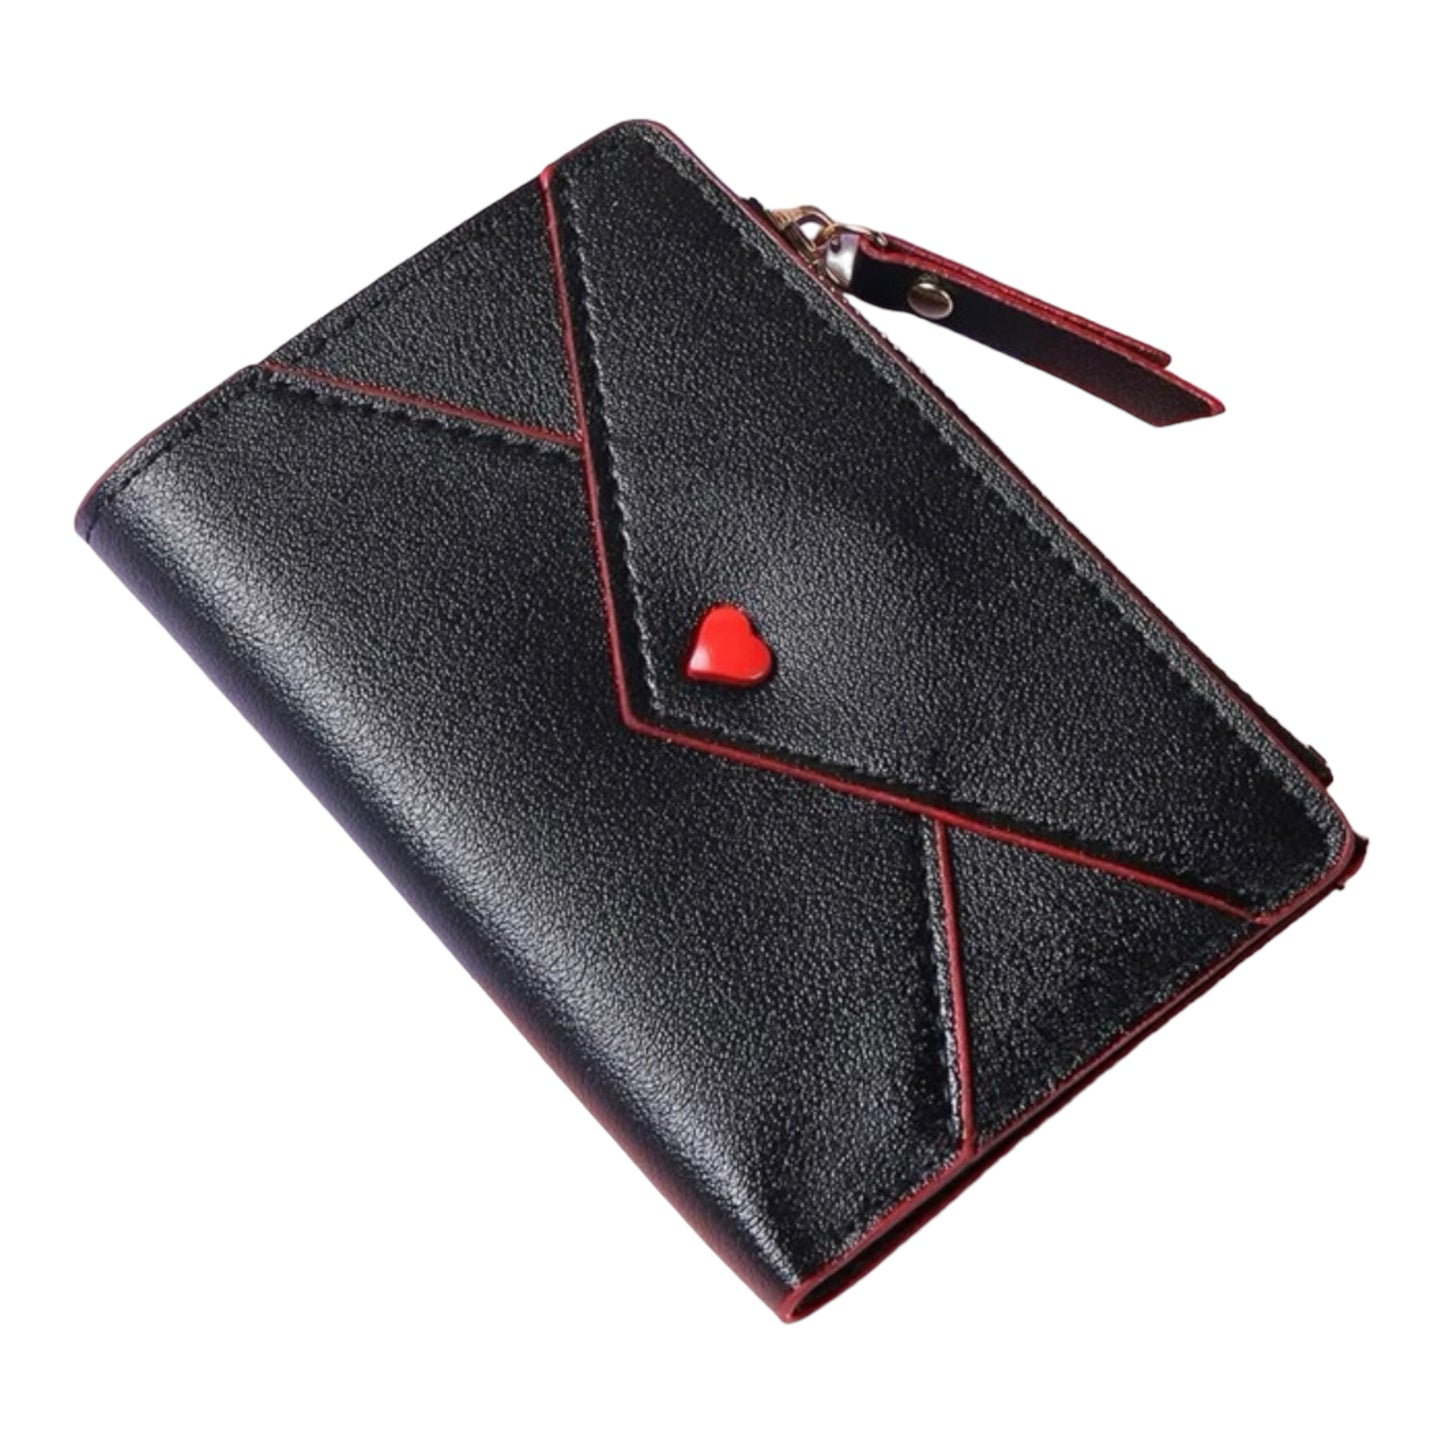 Sealed with a Heart Bifold Wallet